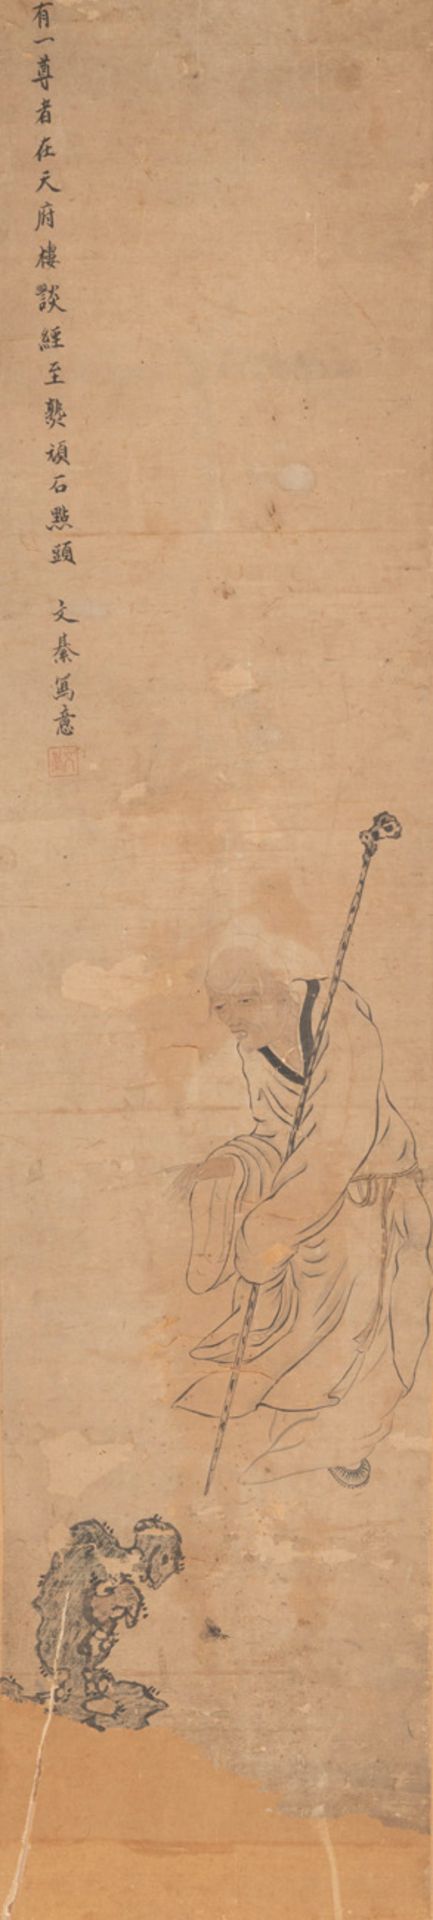 A INK PAPER PAINTING DEPICTING A LUOHAN AND A ROCK, MOUNTED AS A HANGING SCROLL